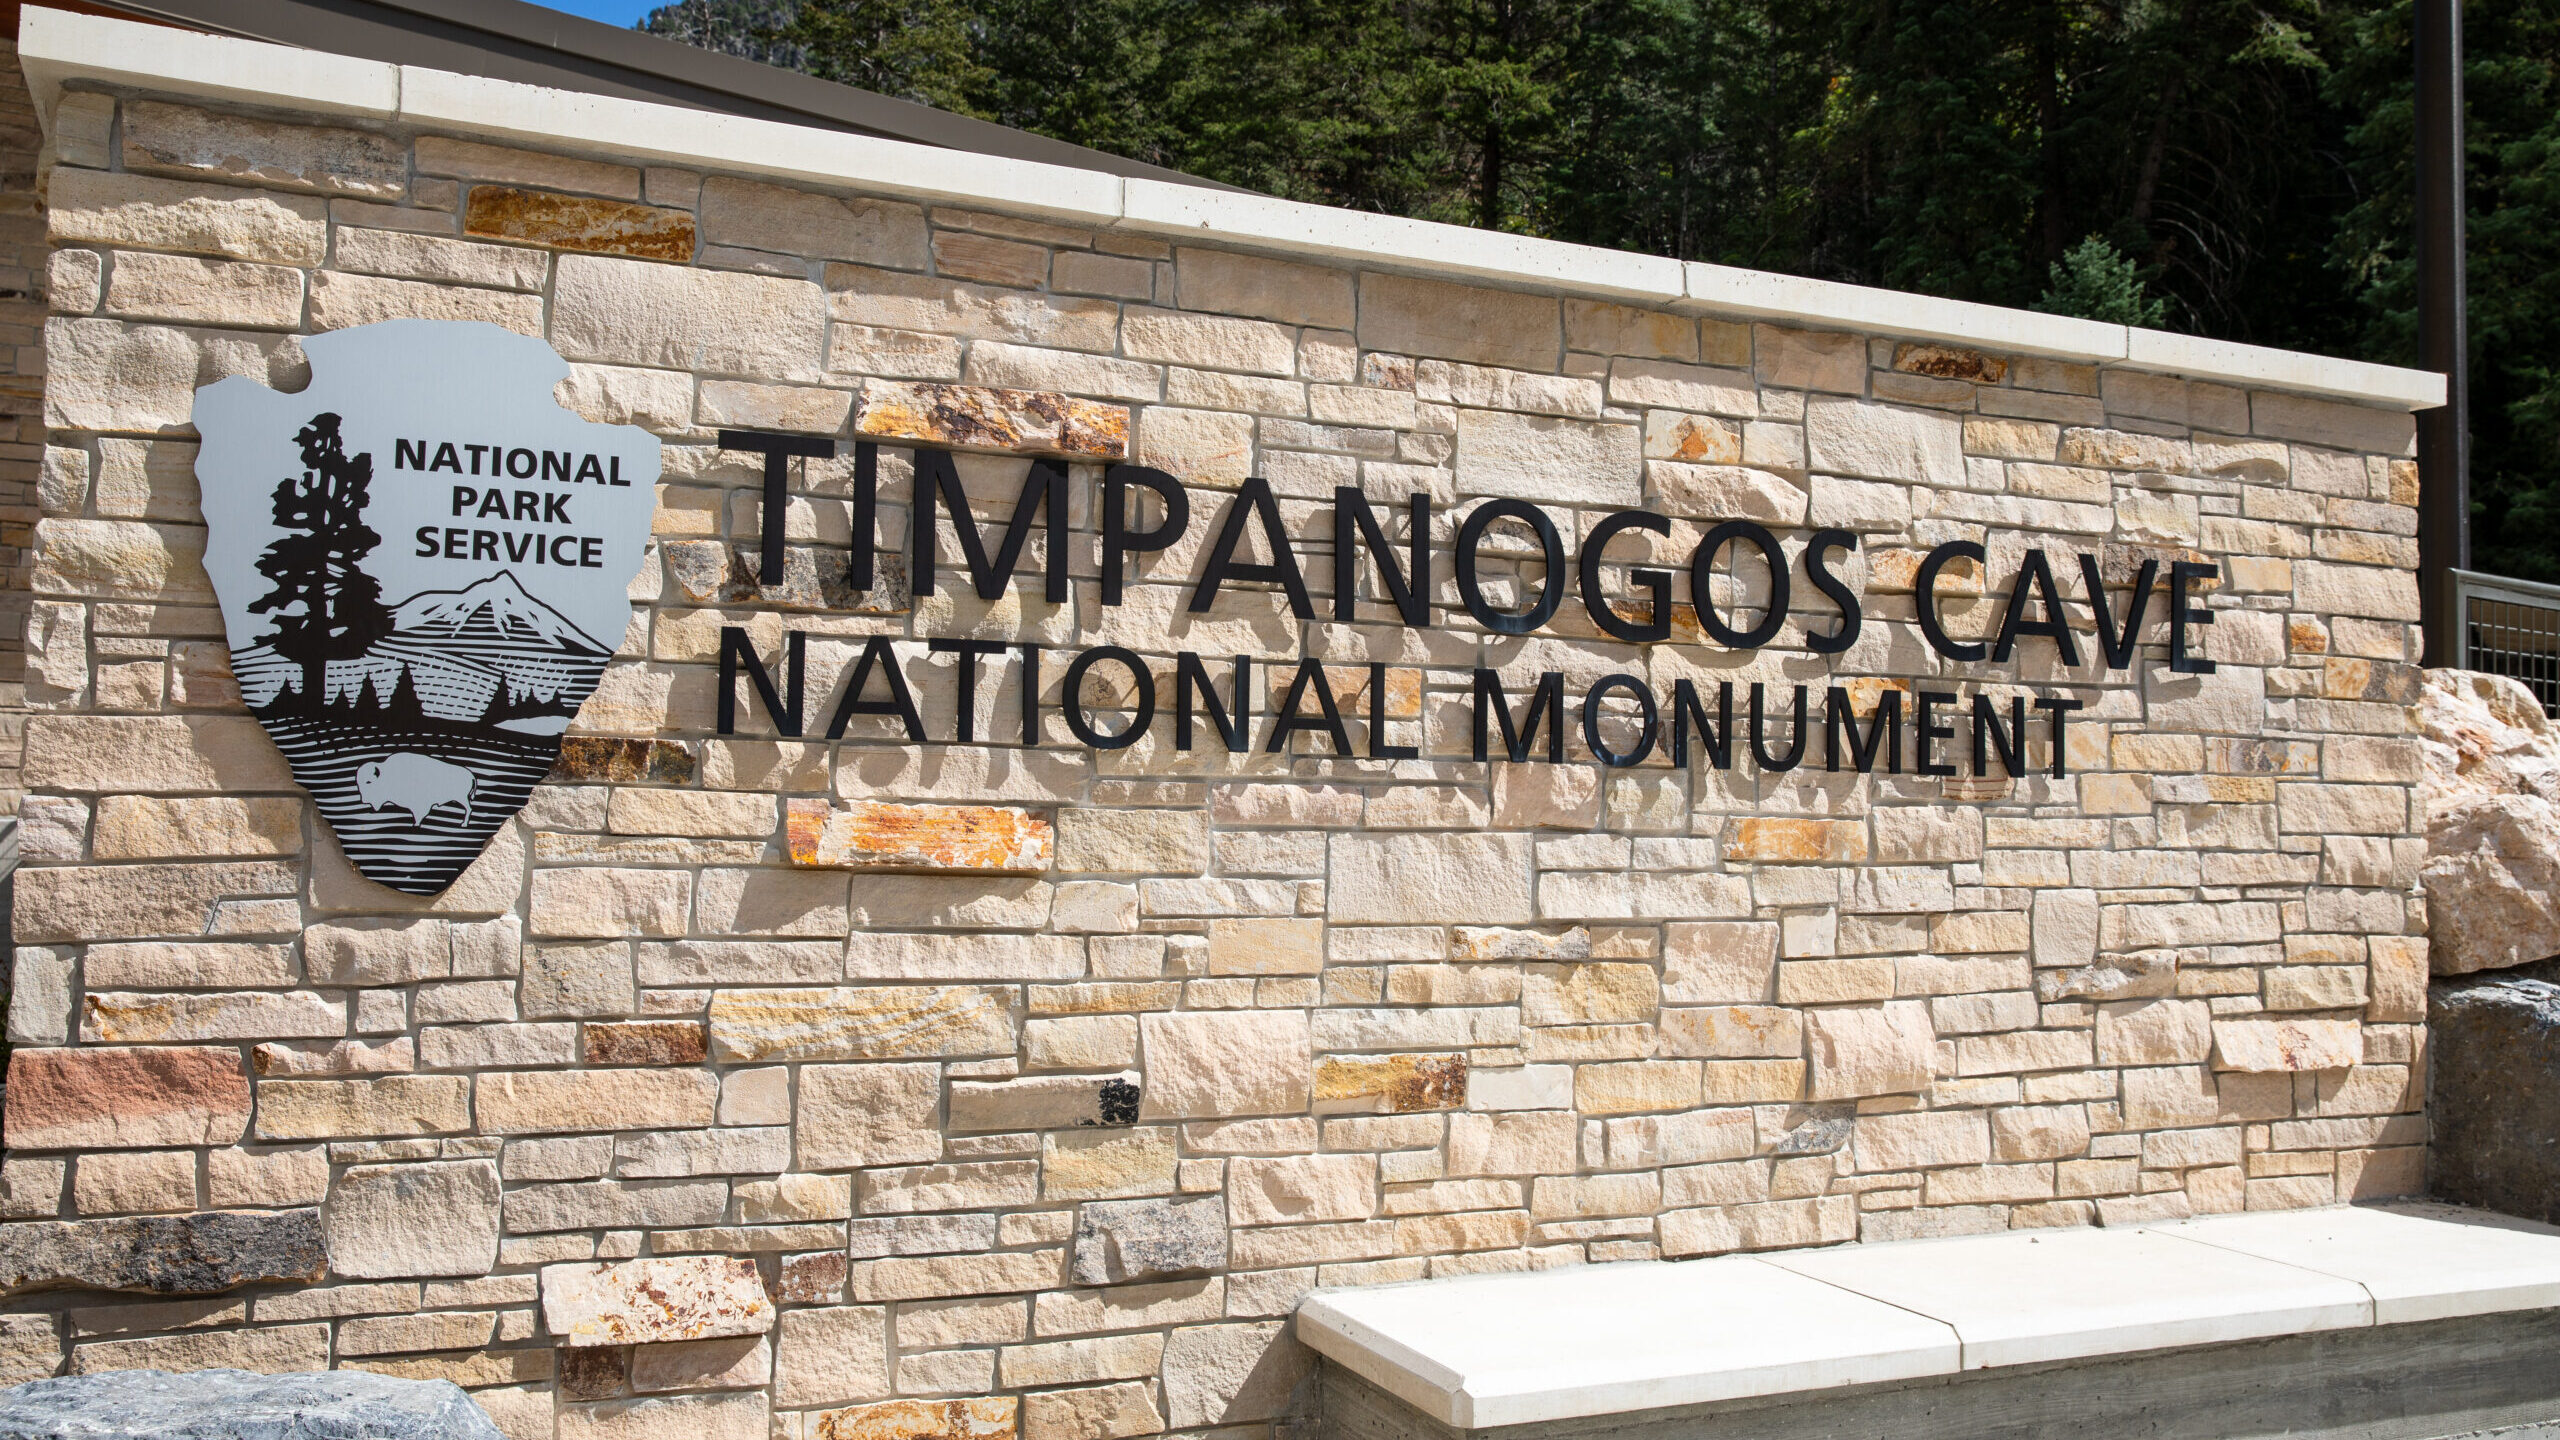 A sign for timpanogos cave national monument...